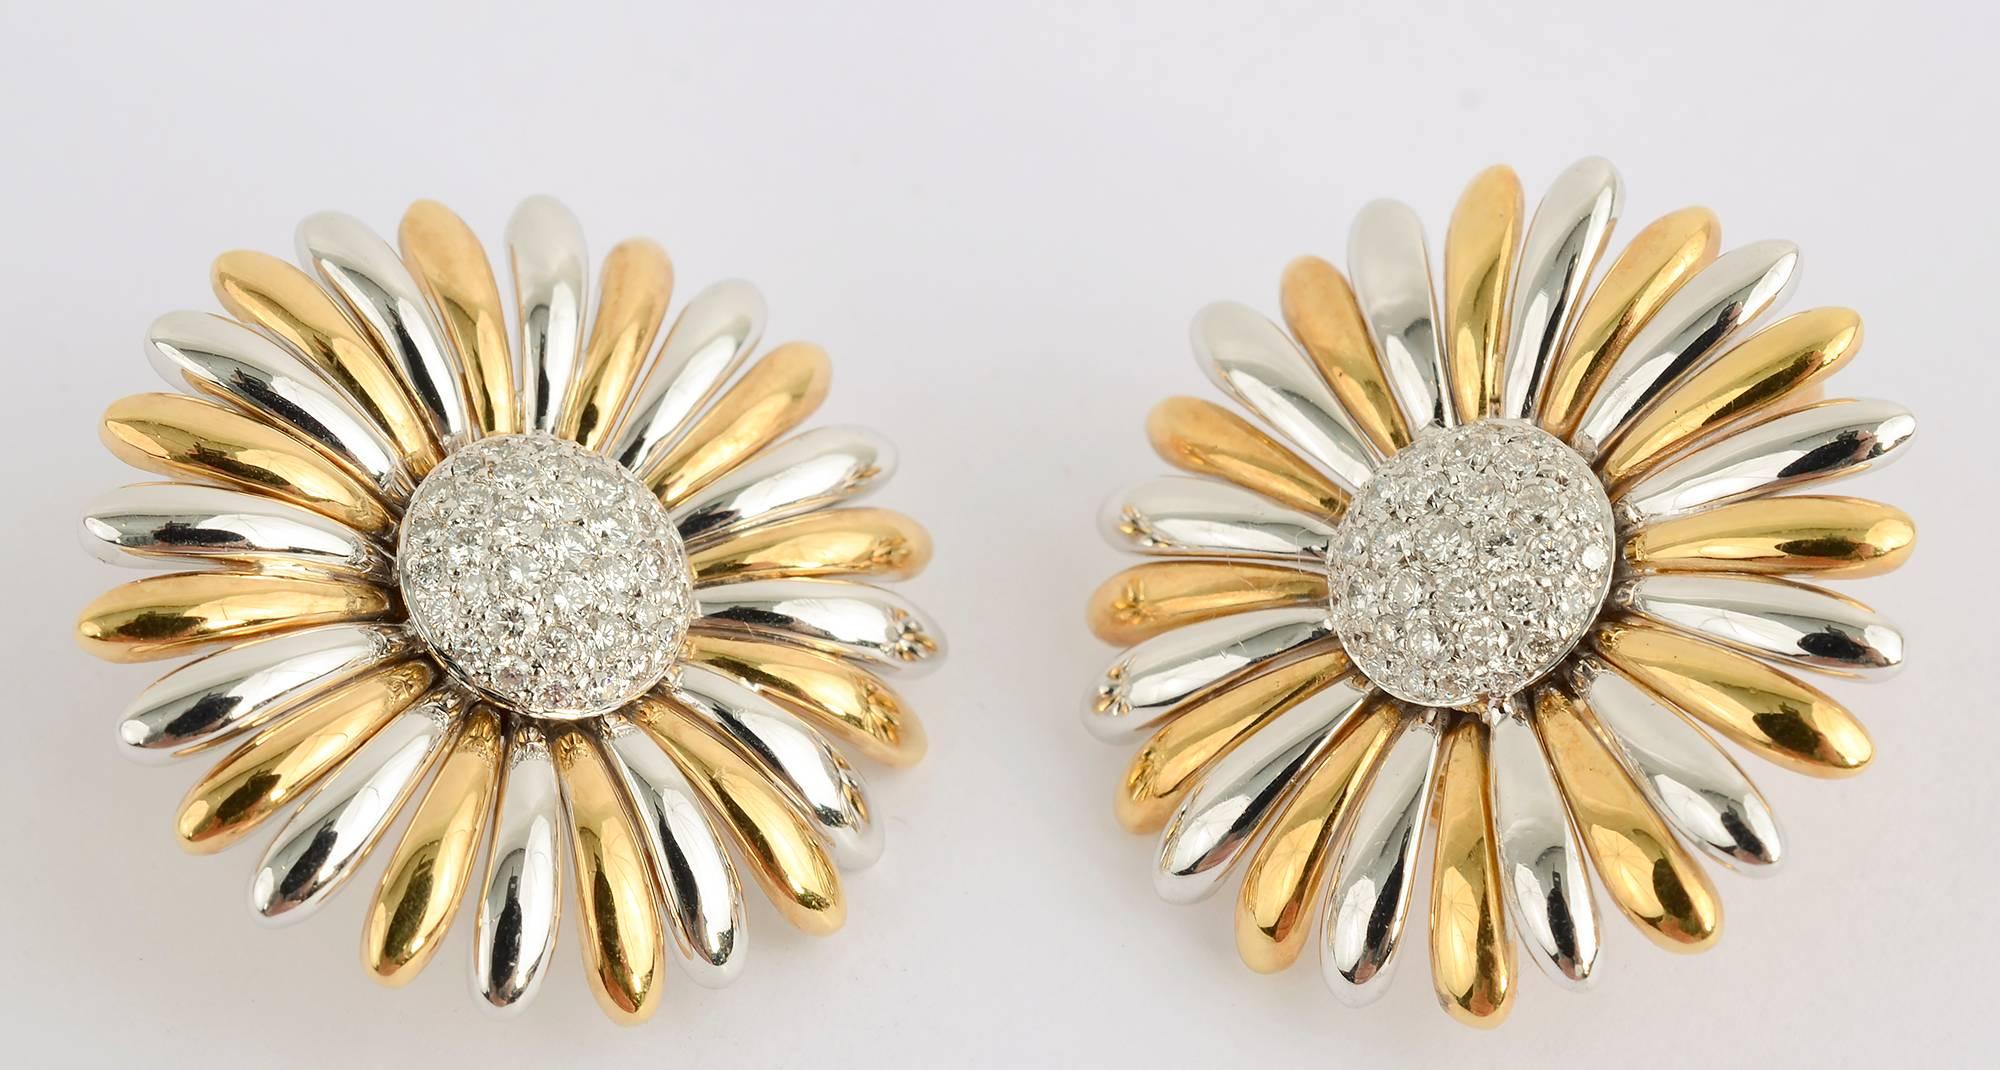 Stunning sunflower earrings by Asprey and Co. Flower petals alternate yellow and white gold. The sparkling centers are pave diamonds.
The backs are clips with retractable posts. The earrings are 1 1/8 inches in diameter.